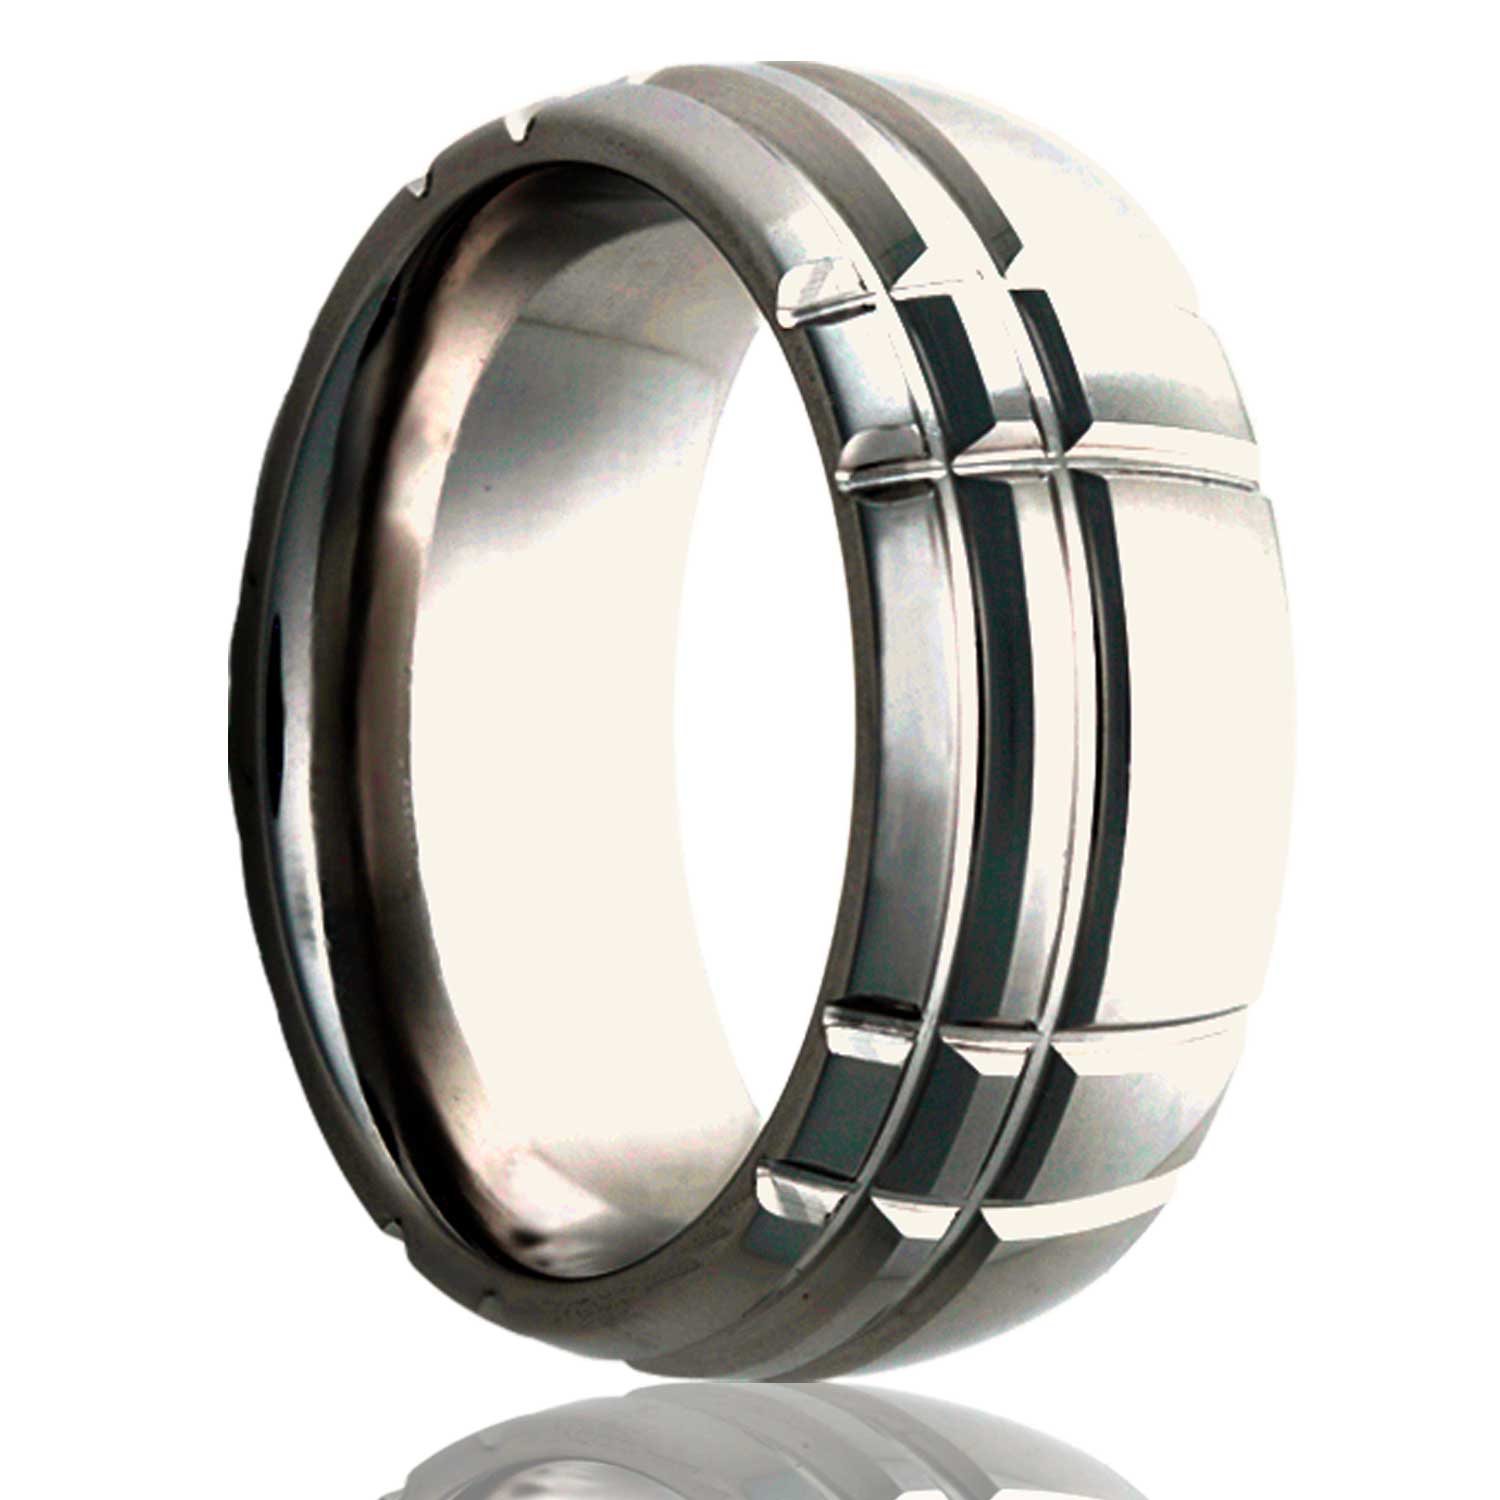 A asymmetrical intersecting grooves domed cobalt wedding band displayed on a neutral white background.